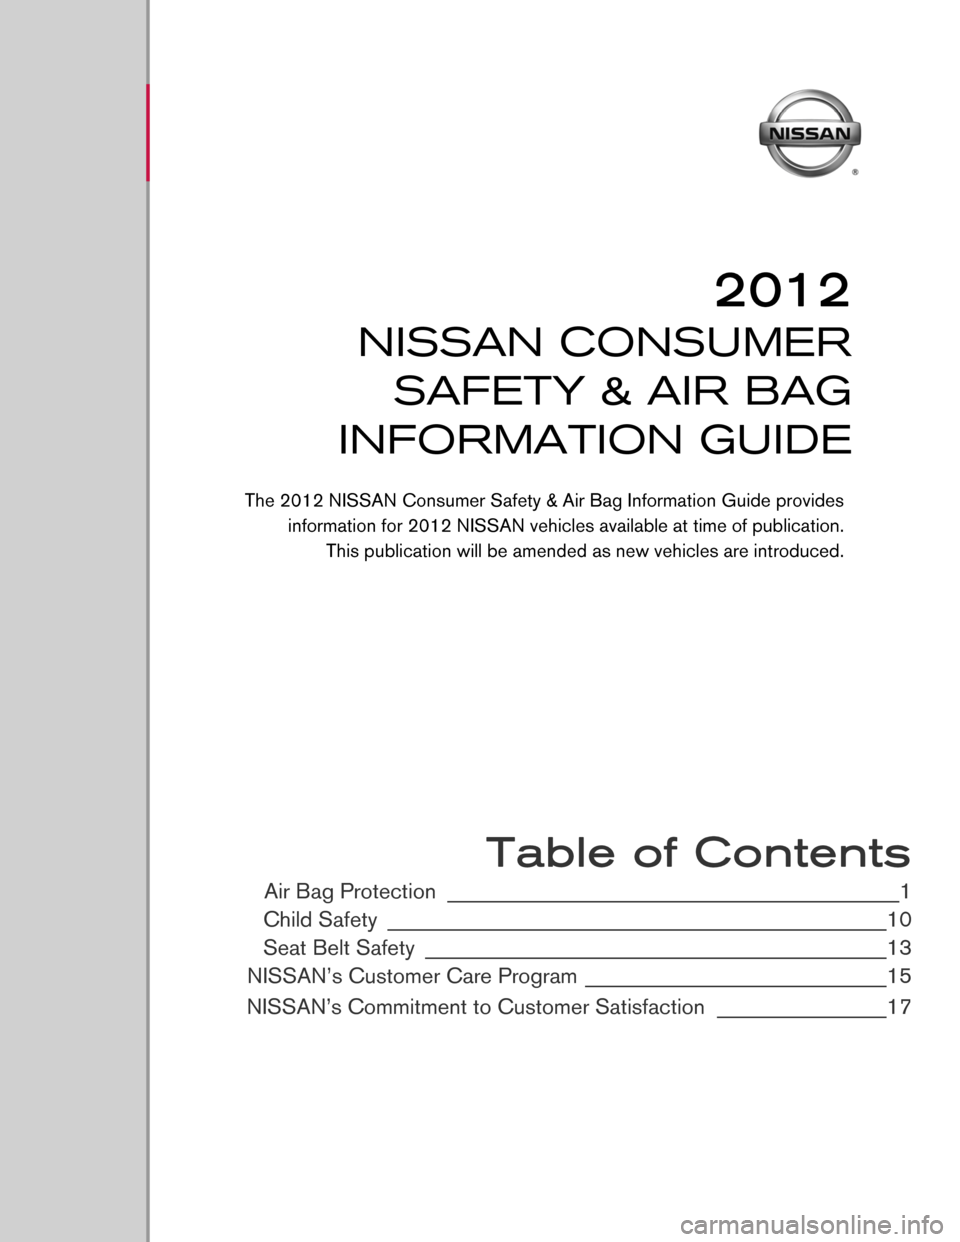 NISSAN 370Z ROADSTER 2012 Z34 Consumer Safety Air Bag Information Guide  
 
 
 
 
 
 
 
 
 
 
 
 
 
 
 
 
 
 
 
 
 
 
 Table of Contents
Air Bag Protection ________________________________________________1
Child Safety
 ____________________________________________________